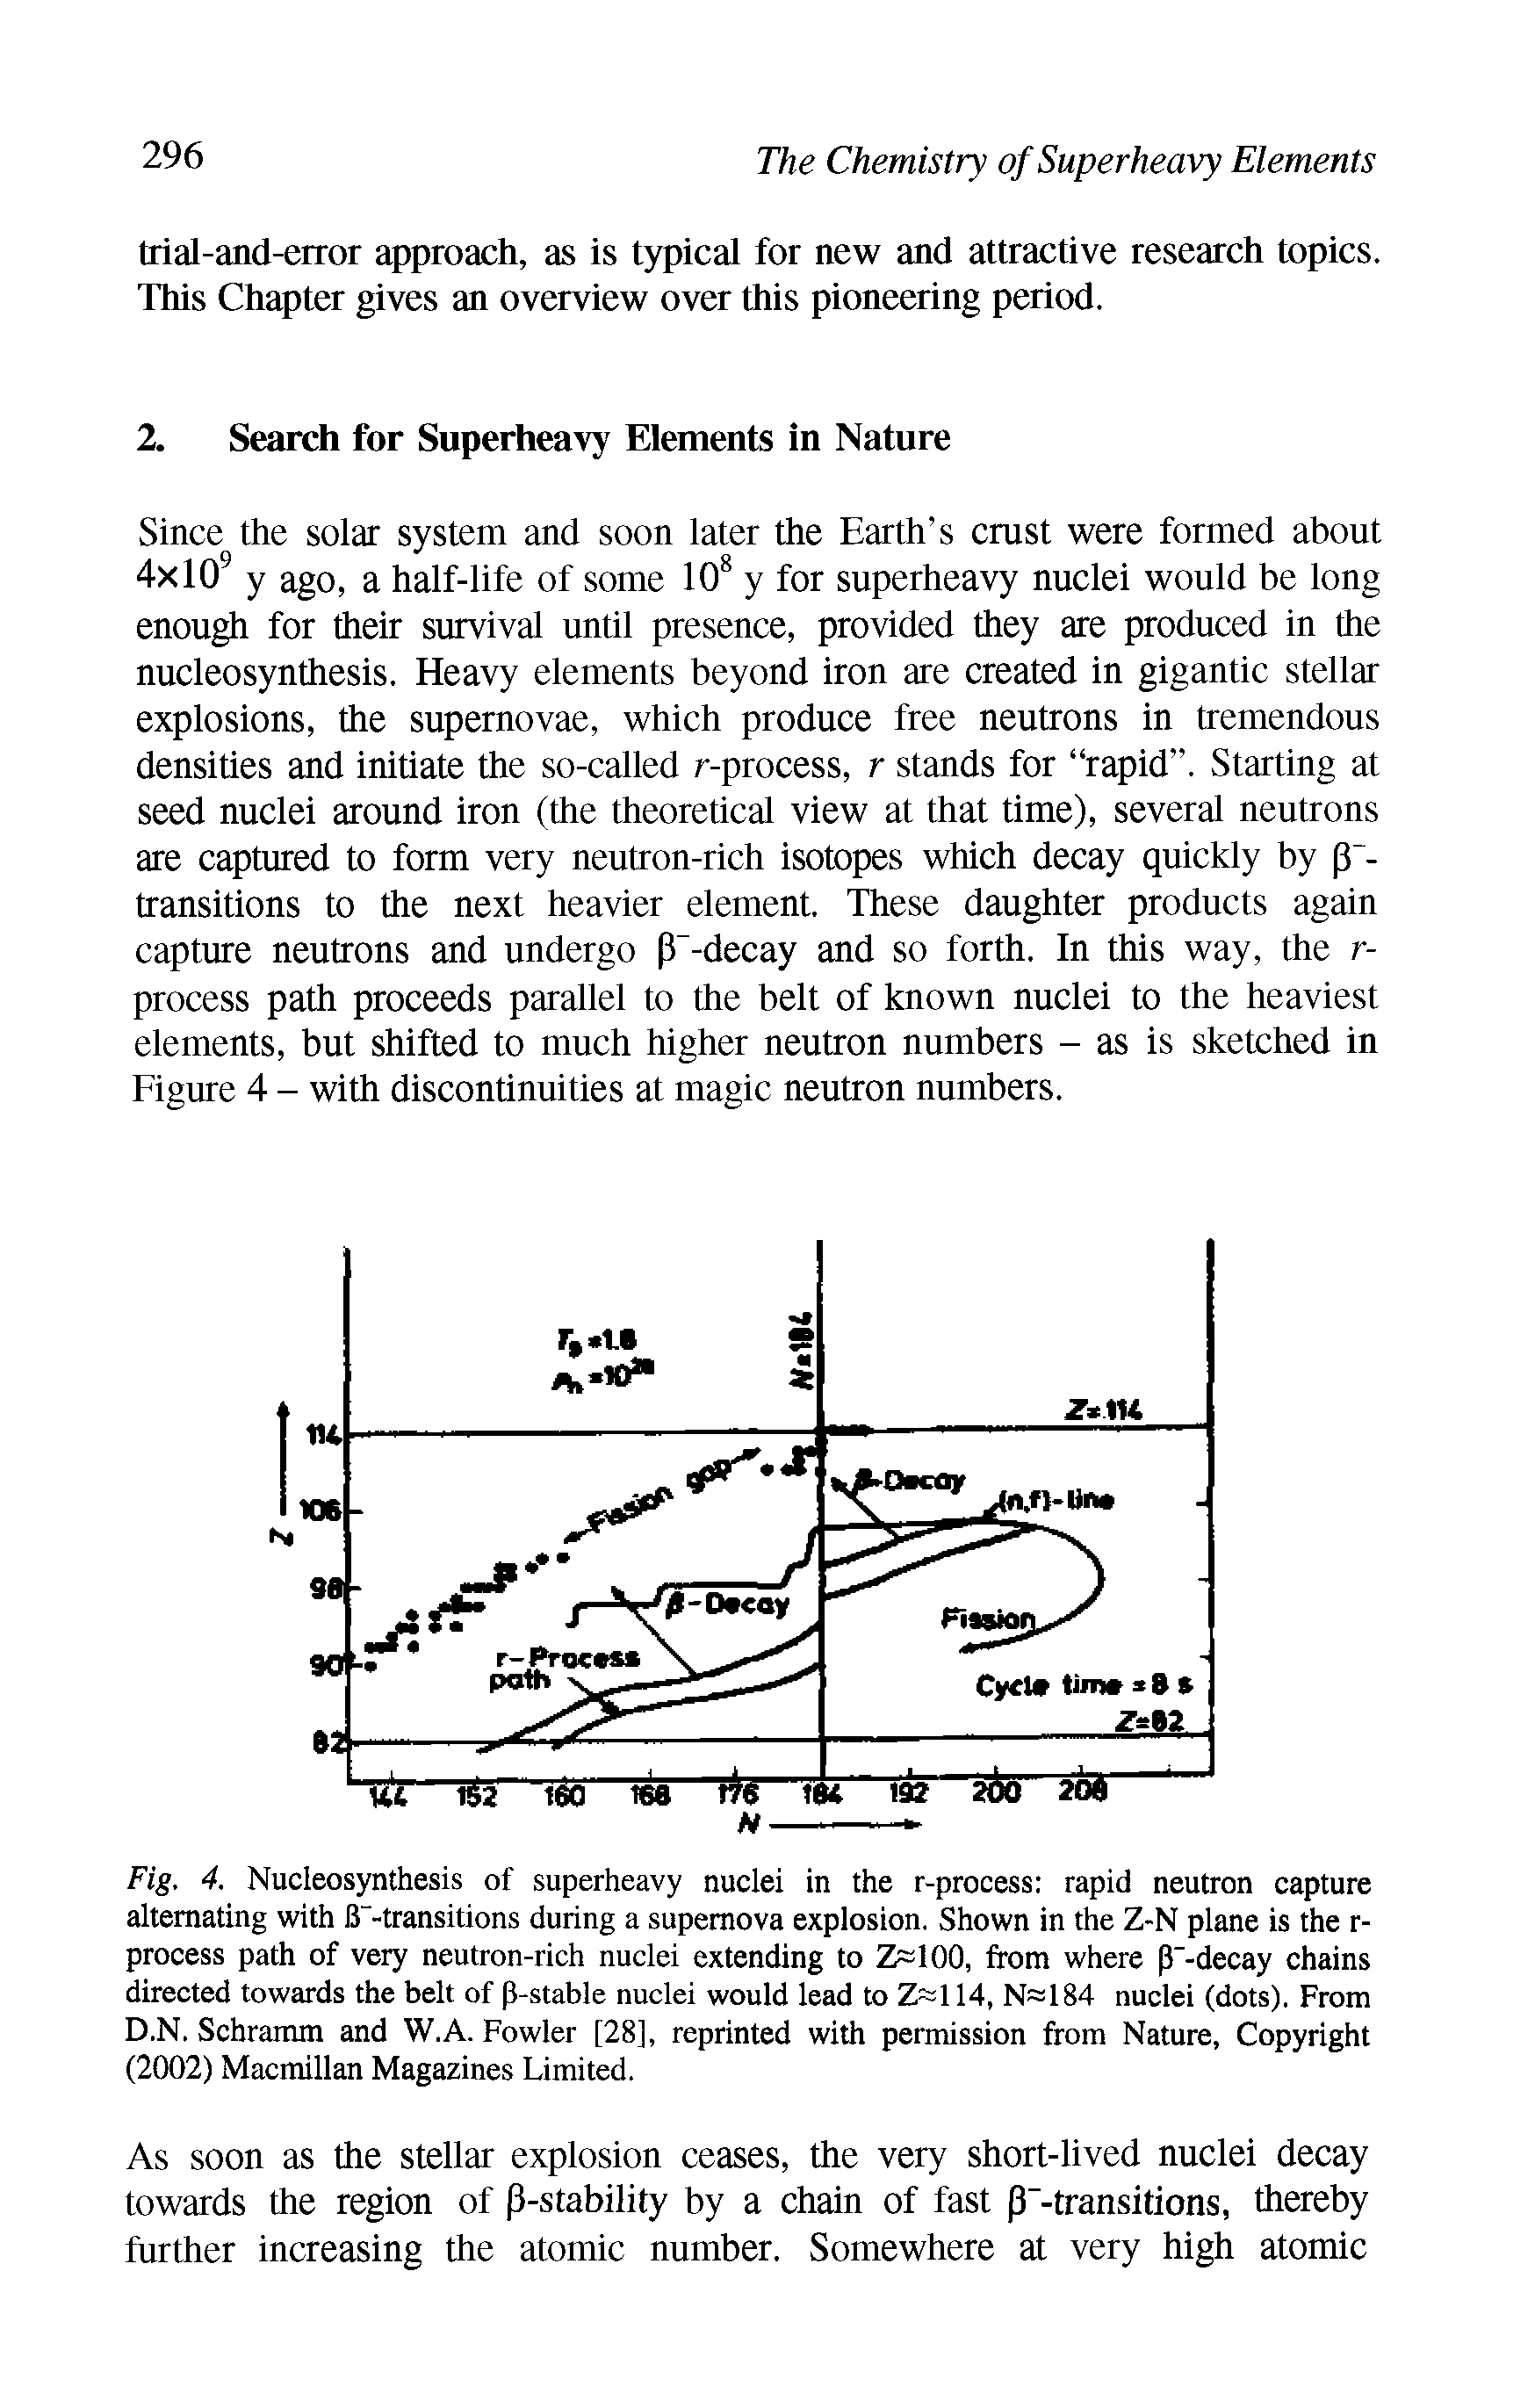 Fig. 4. Nucleosynthesis of superheavy nuclei in the r-process rapid neutron capture alternating with IT-transilions during a supernova explosion. Shown in the Z-N plane is the r-process path of very neutron-rich nuclei extending to ZA100, from where p -decay chains directed towards the belt of p-stable nuclei would lead to Z 114, N=184 nuclei (dots). From D.N. Schramm and W.A. Fowler [28], reprinted with permission from Nature, Copyright (2002) Macmillan Magazines Limited.